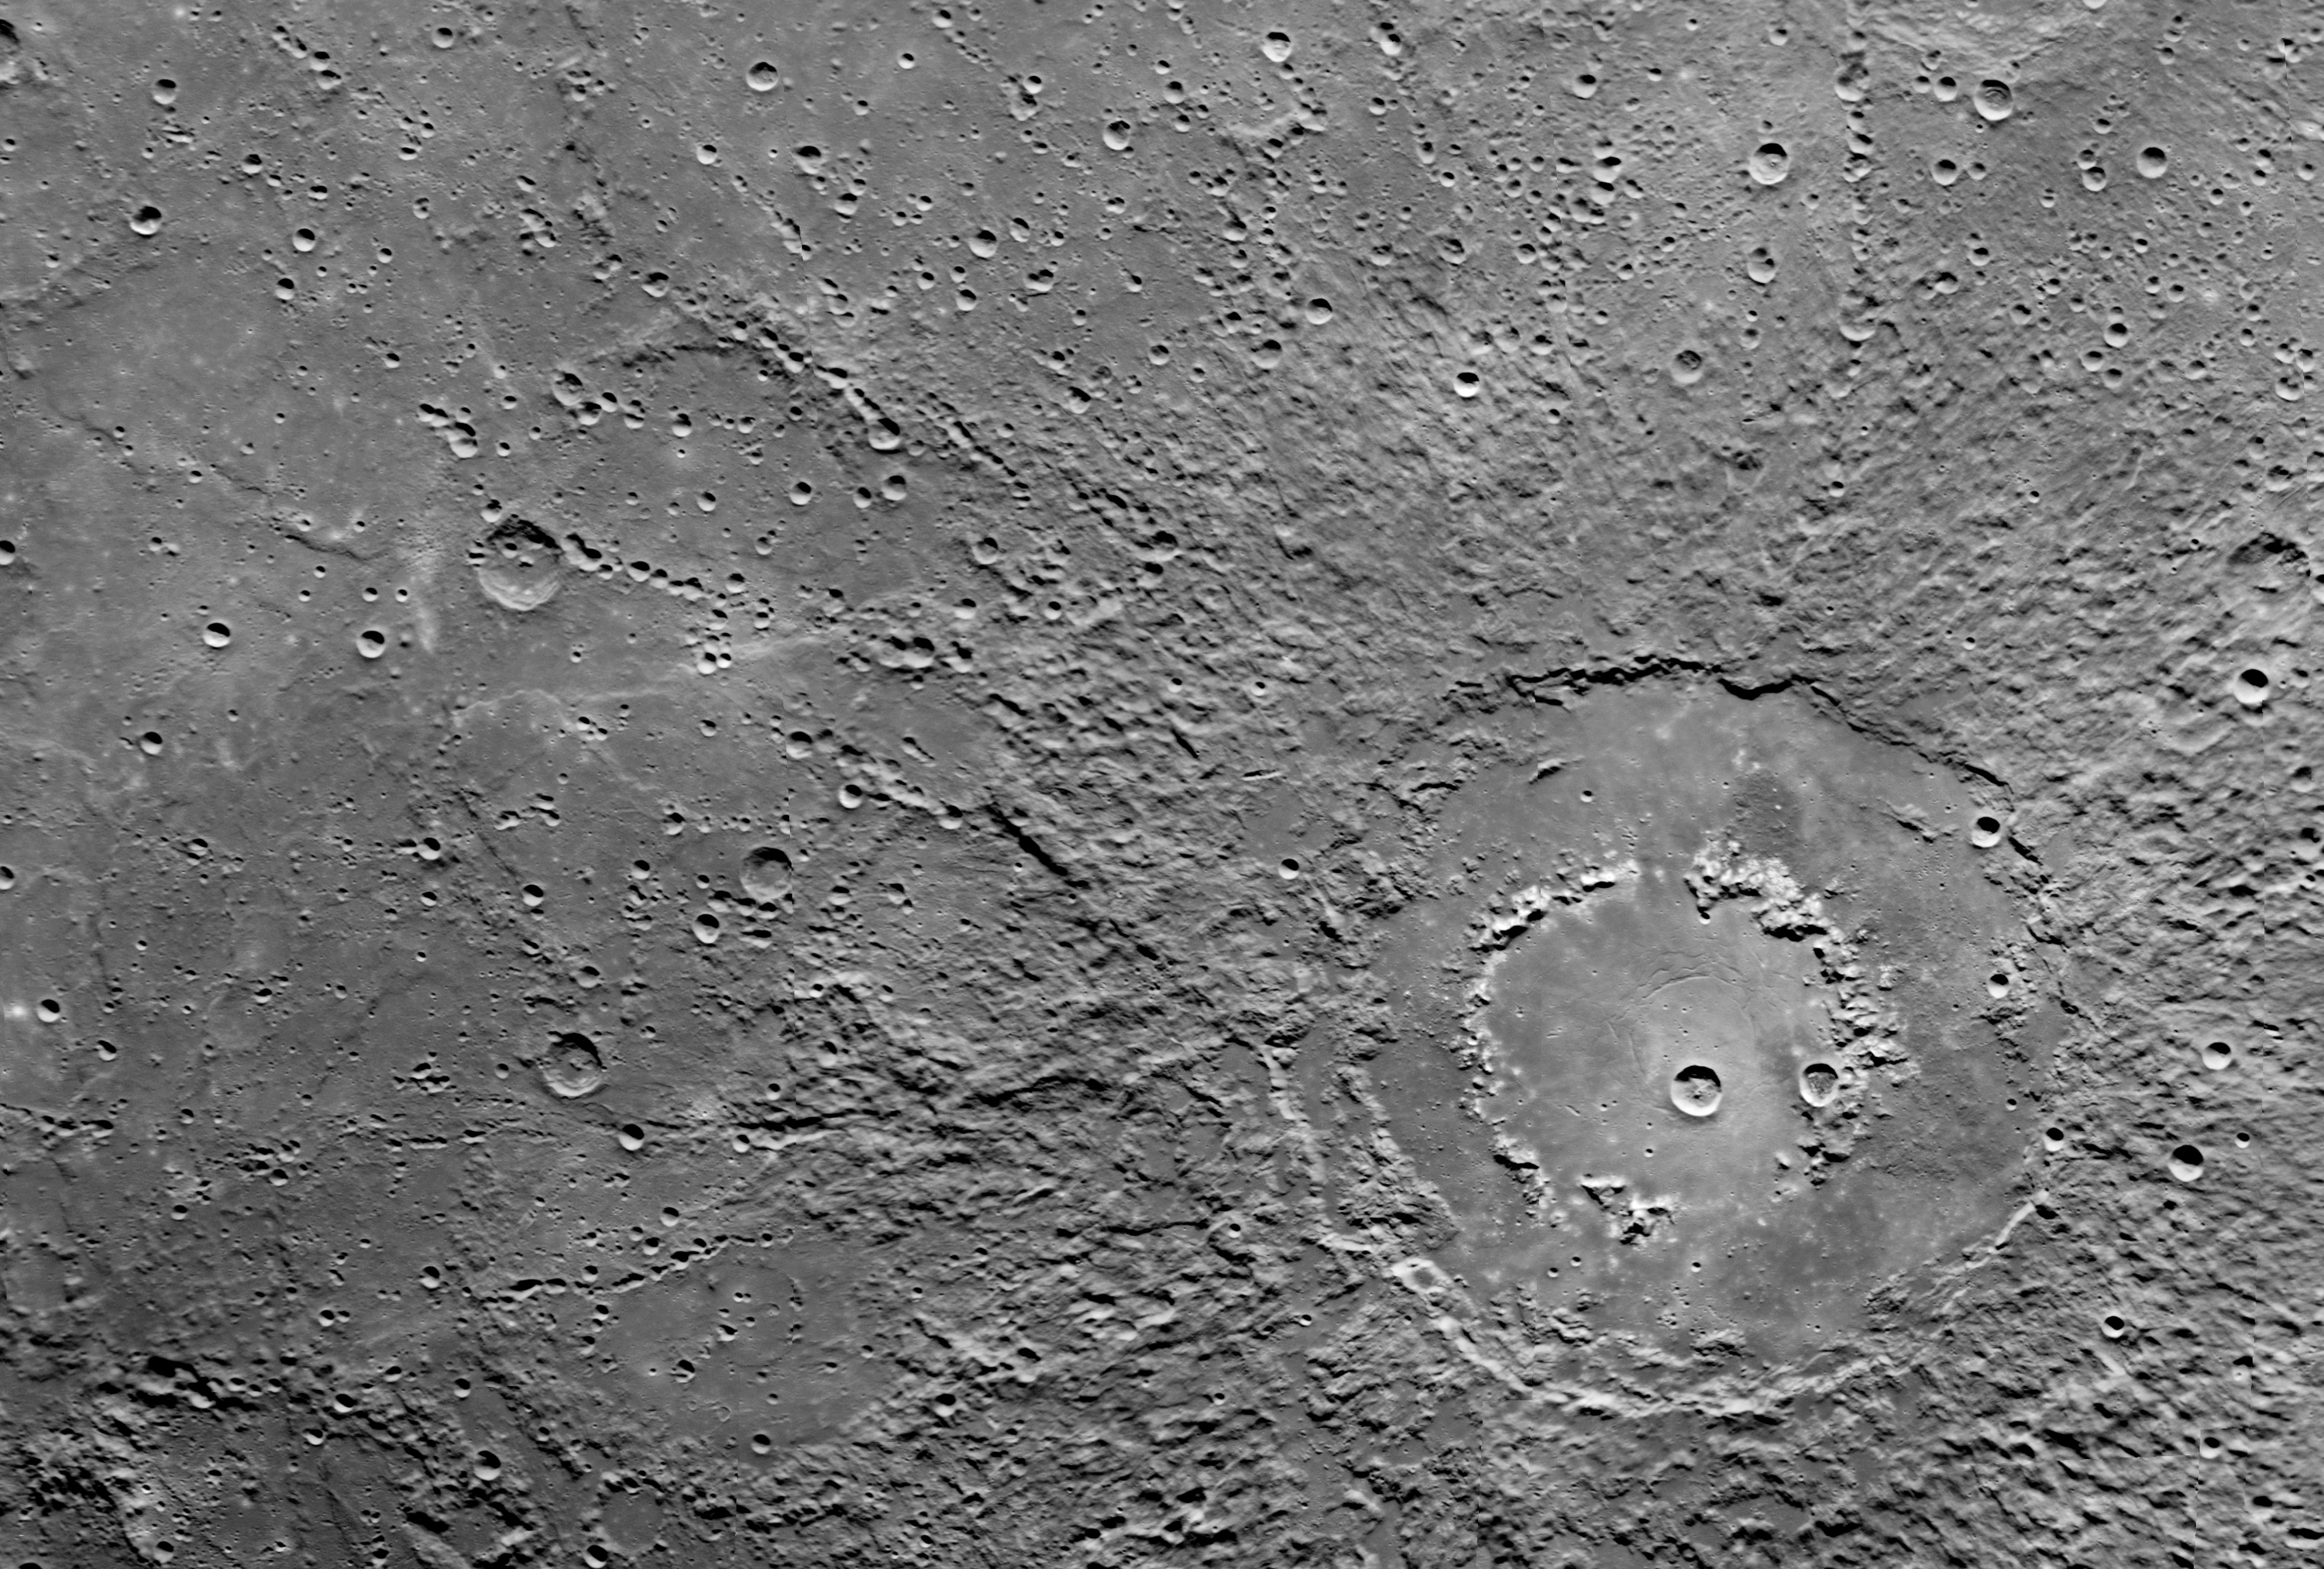 Close-up image of craters.